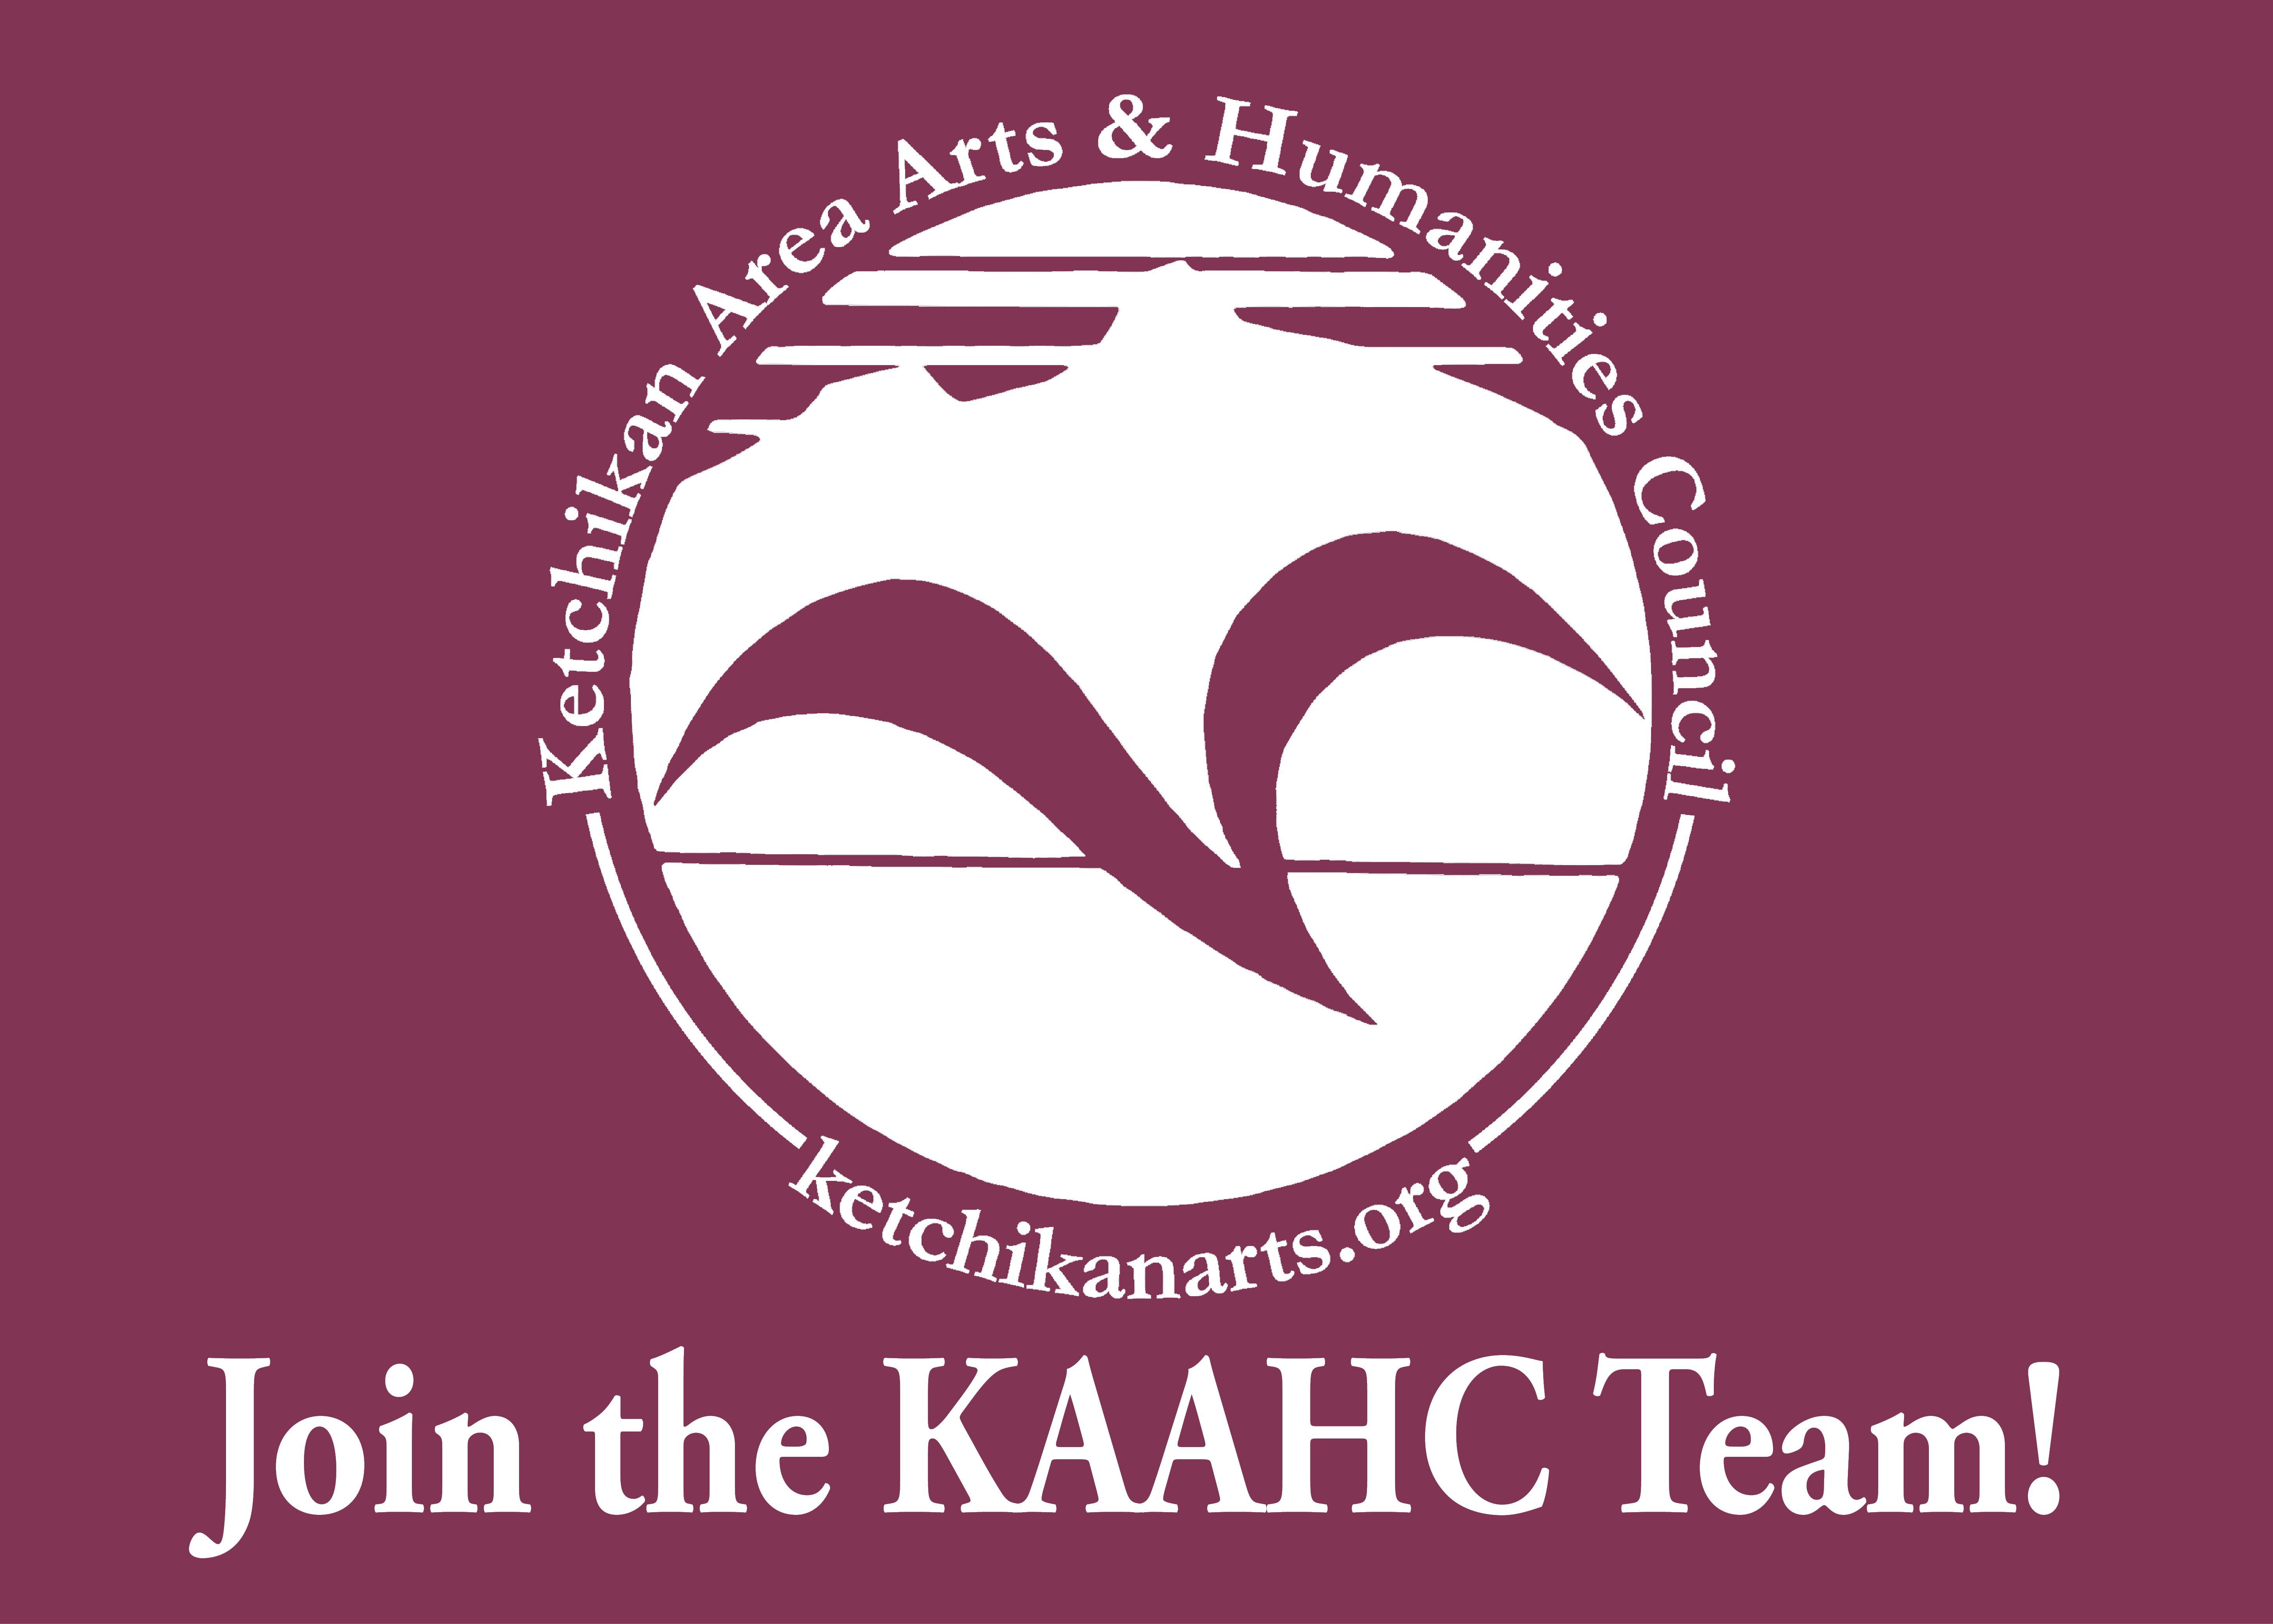 Become the new KAAHC Program Director - Do cool stuff, Help artists, Make community!